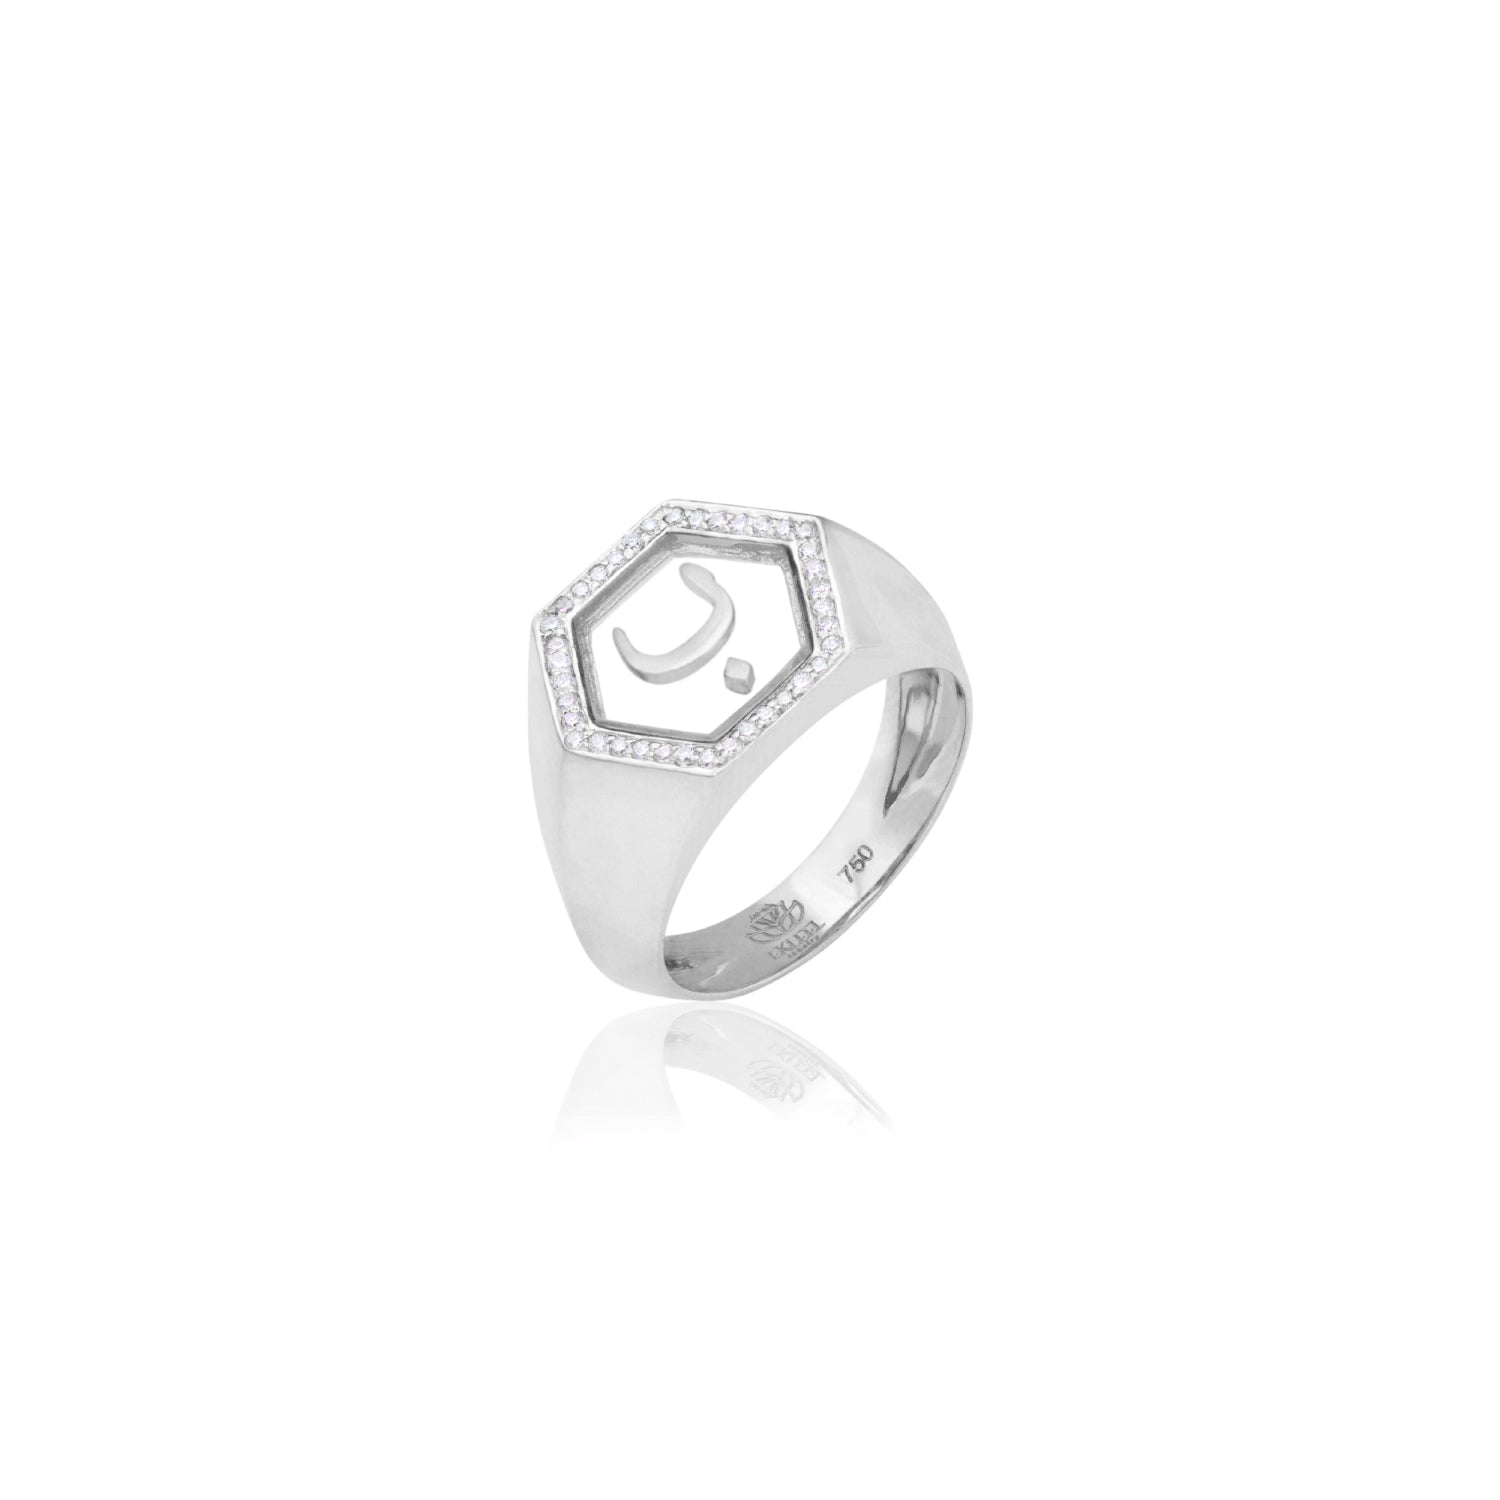 Qamoos 2.0 Letter ب Plexiglass and Diamond Signet Ring in White Gold